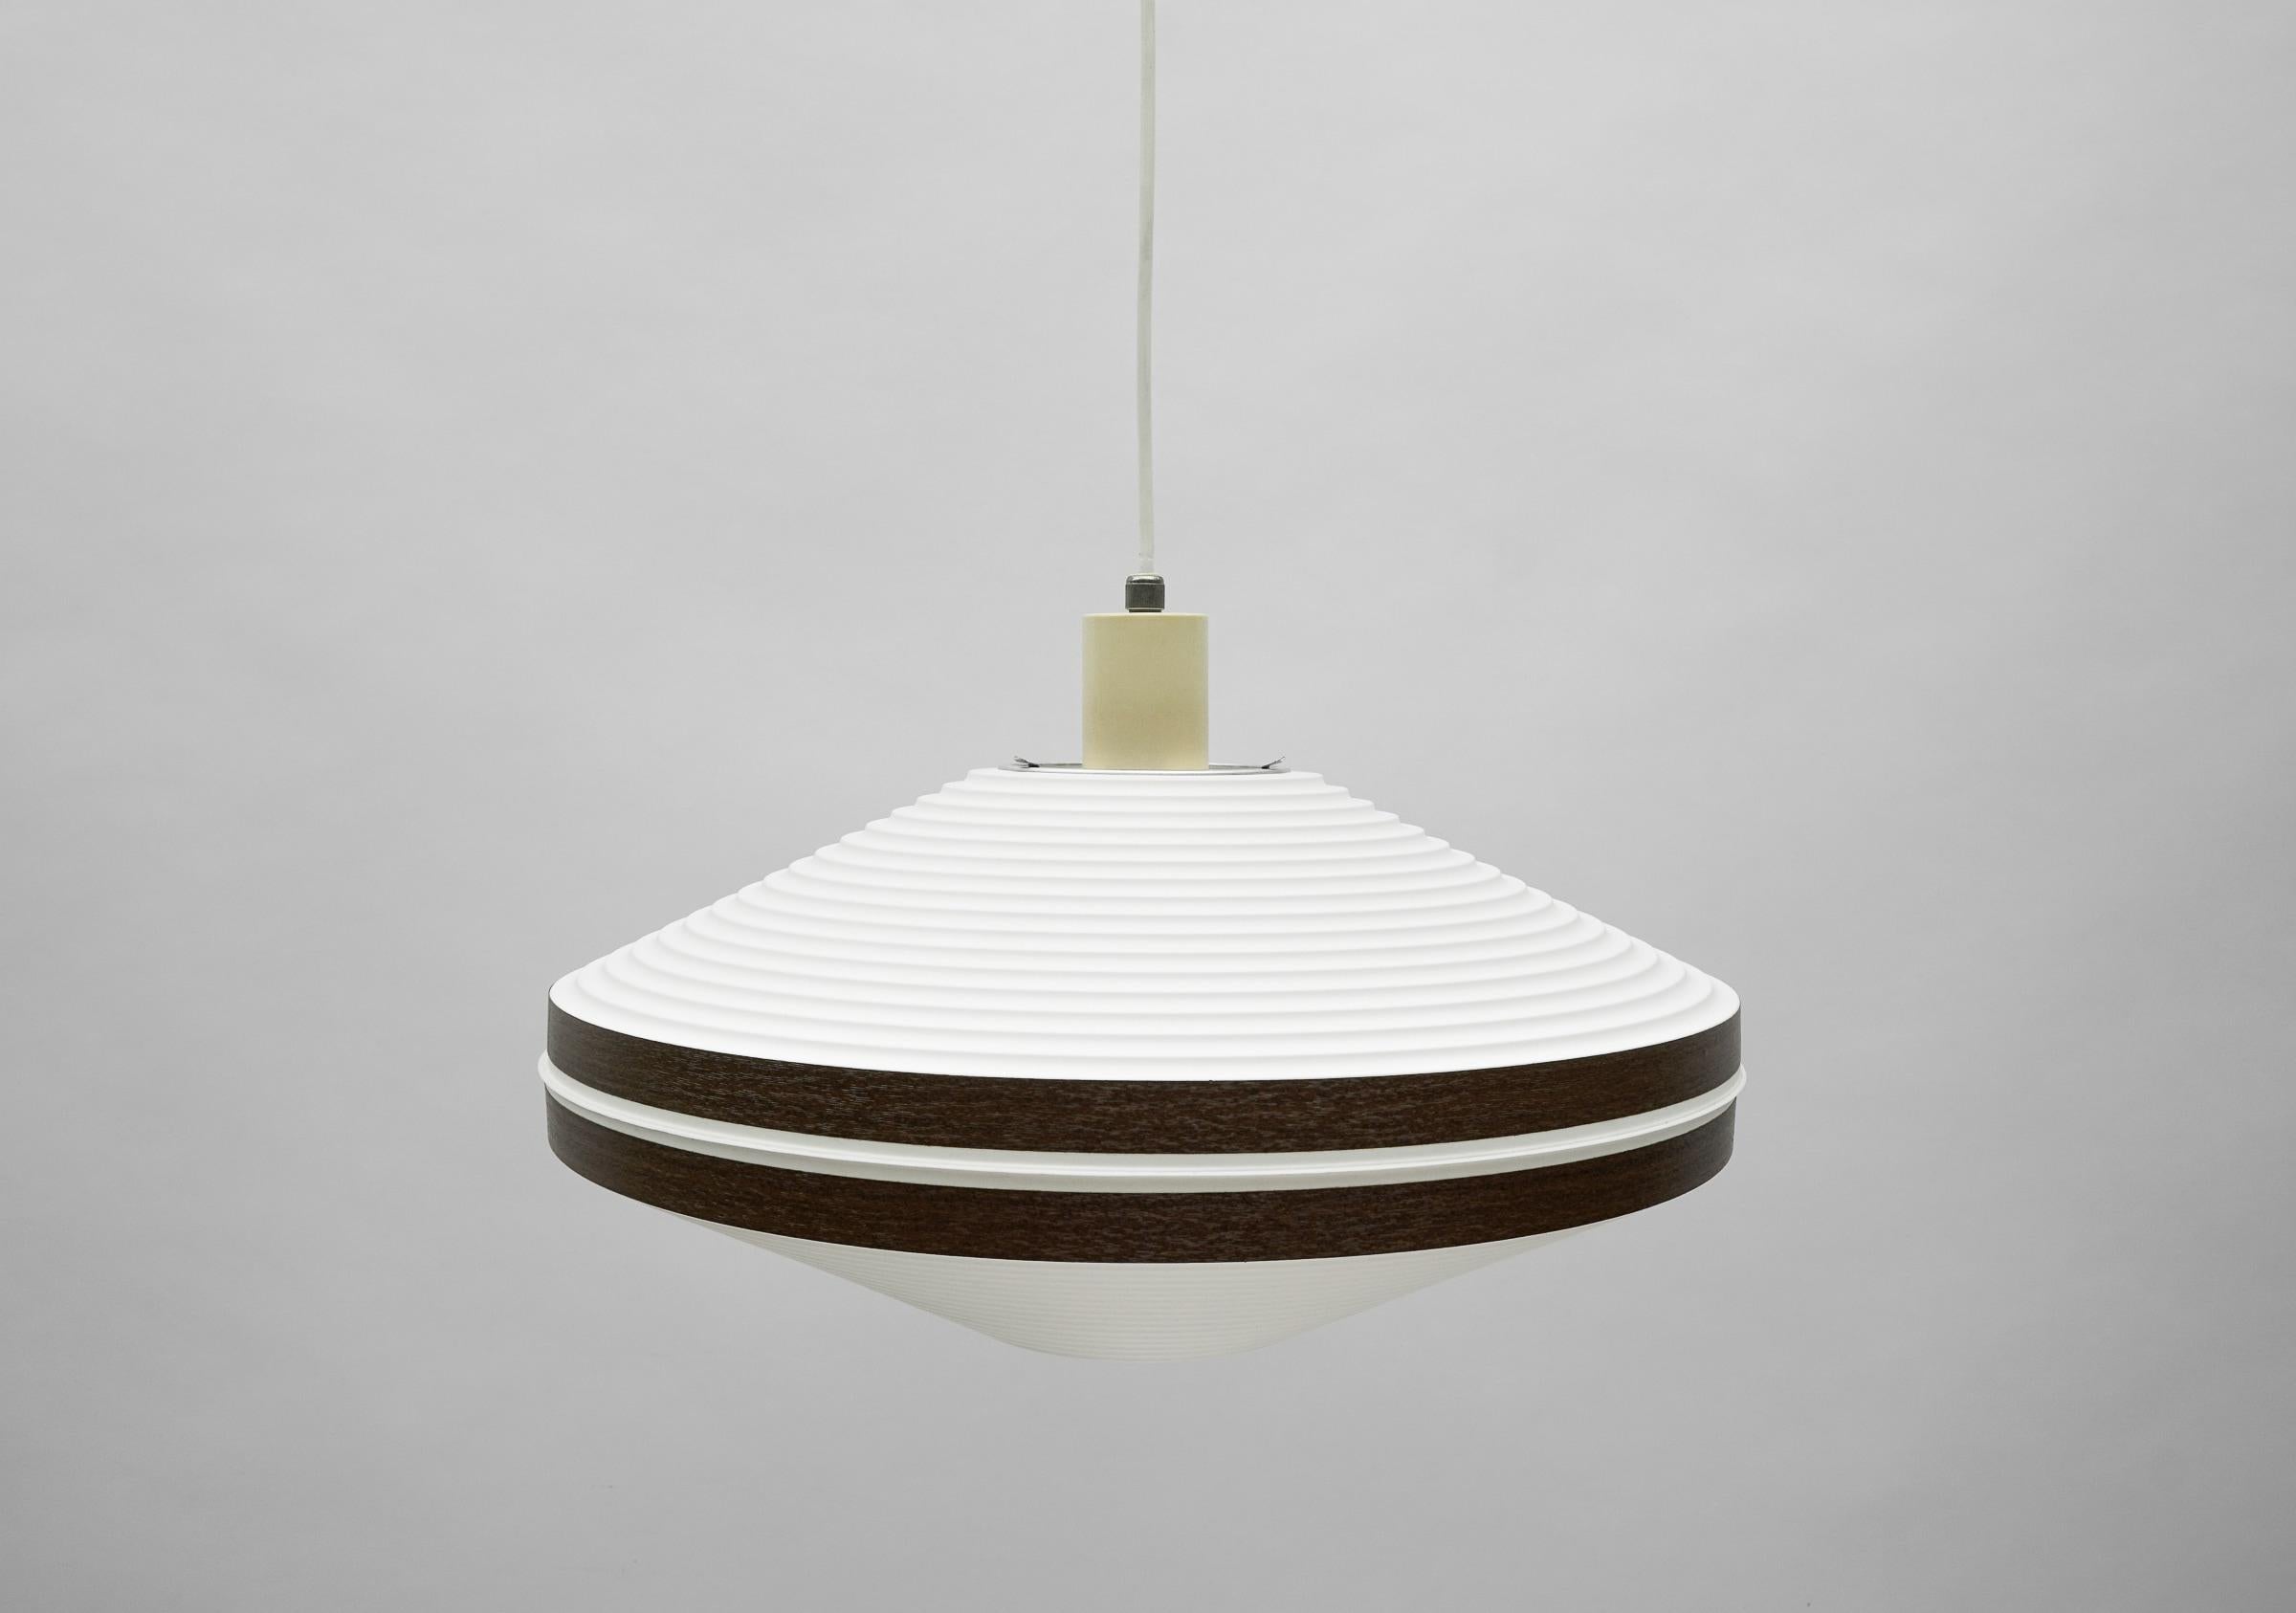 Rare Brown & White Ufo Pendant Lamp by Aloys F. Gangkofner for ERCO Leuchten In Good Condition For Sale In Nürnberg, Bayern